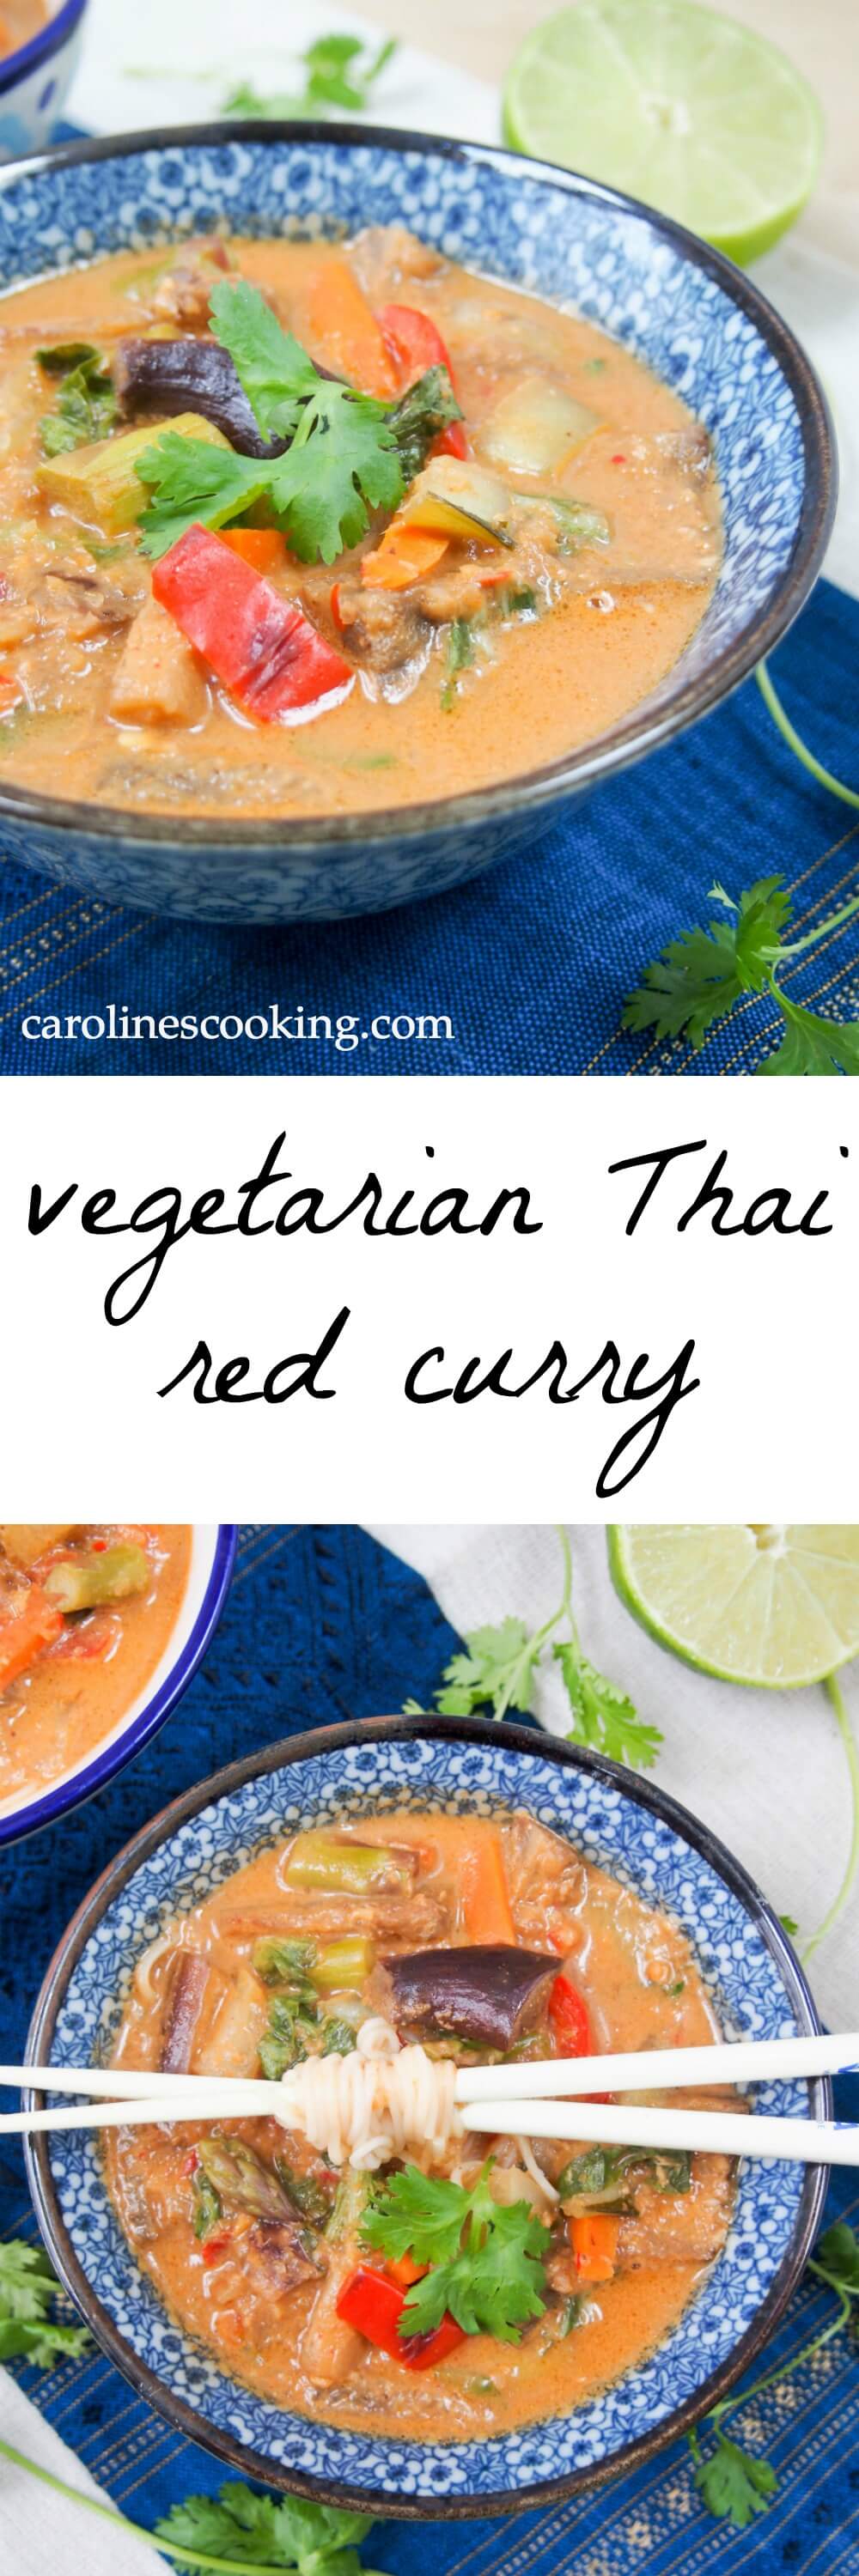 Vegetarian Thai red curry - an easy vegan curry from scratch that's full of veggies, creamy coconut and spicy flavor.